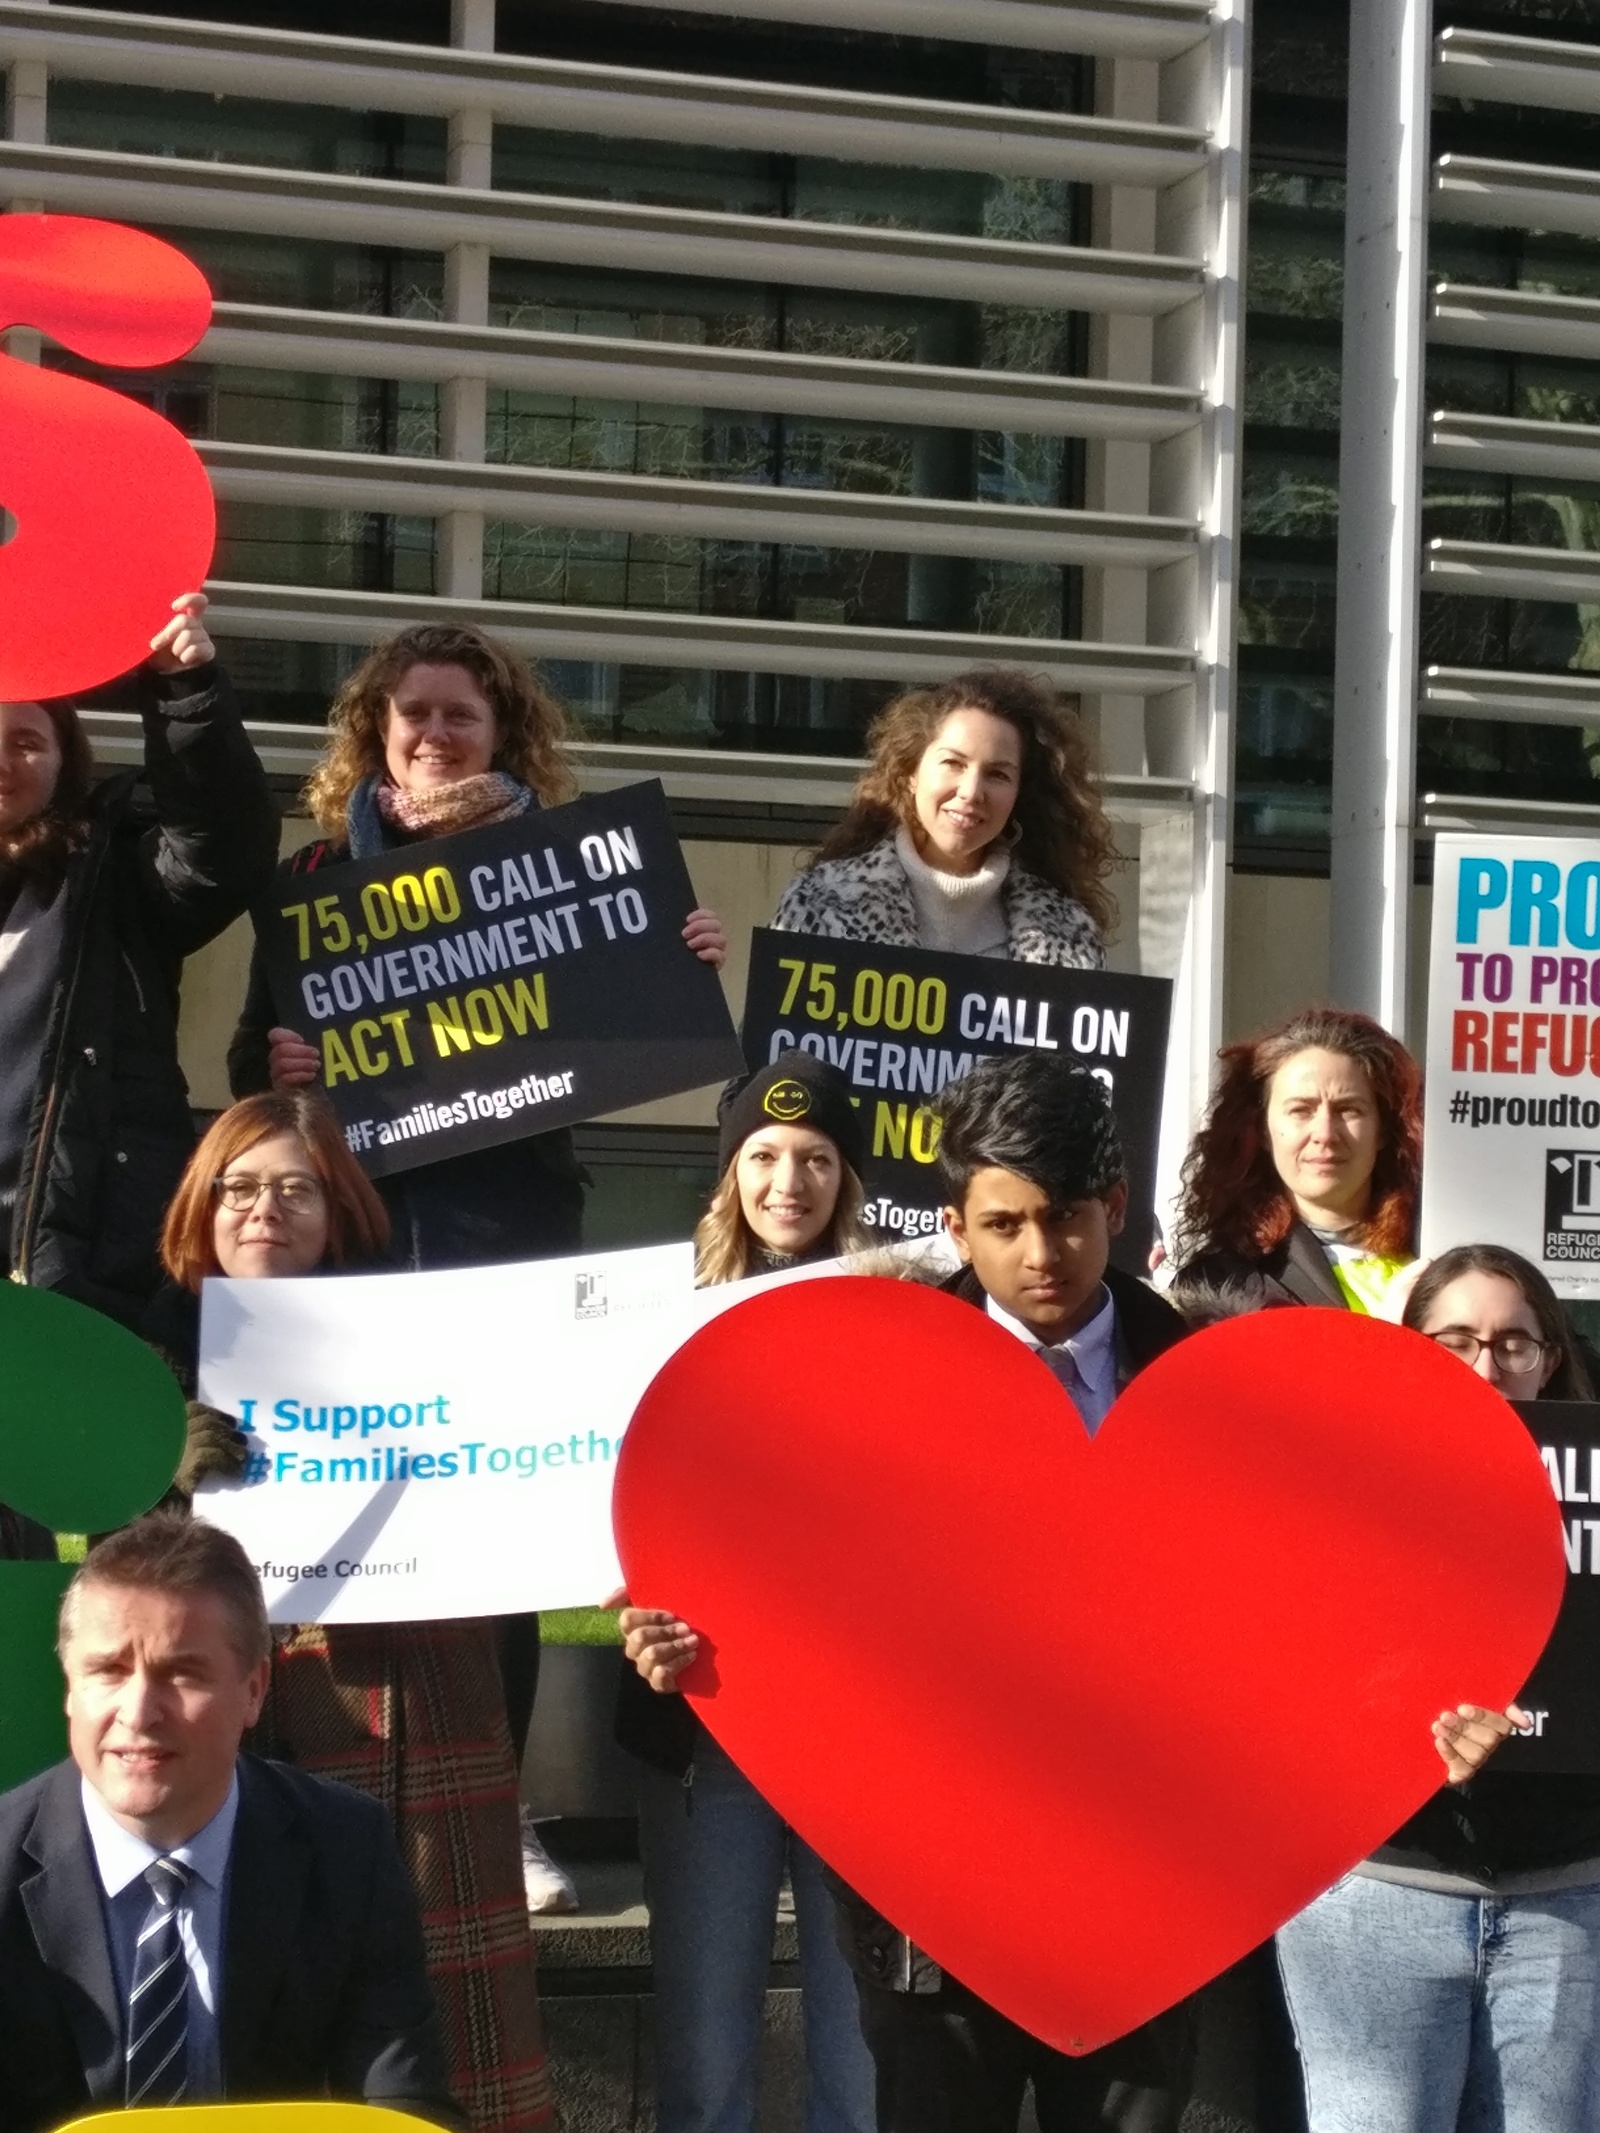 Campaigners and students gather outside the Home Office in London